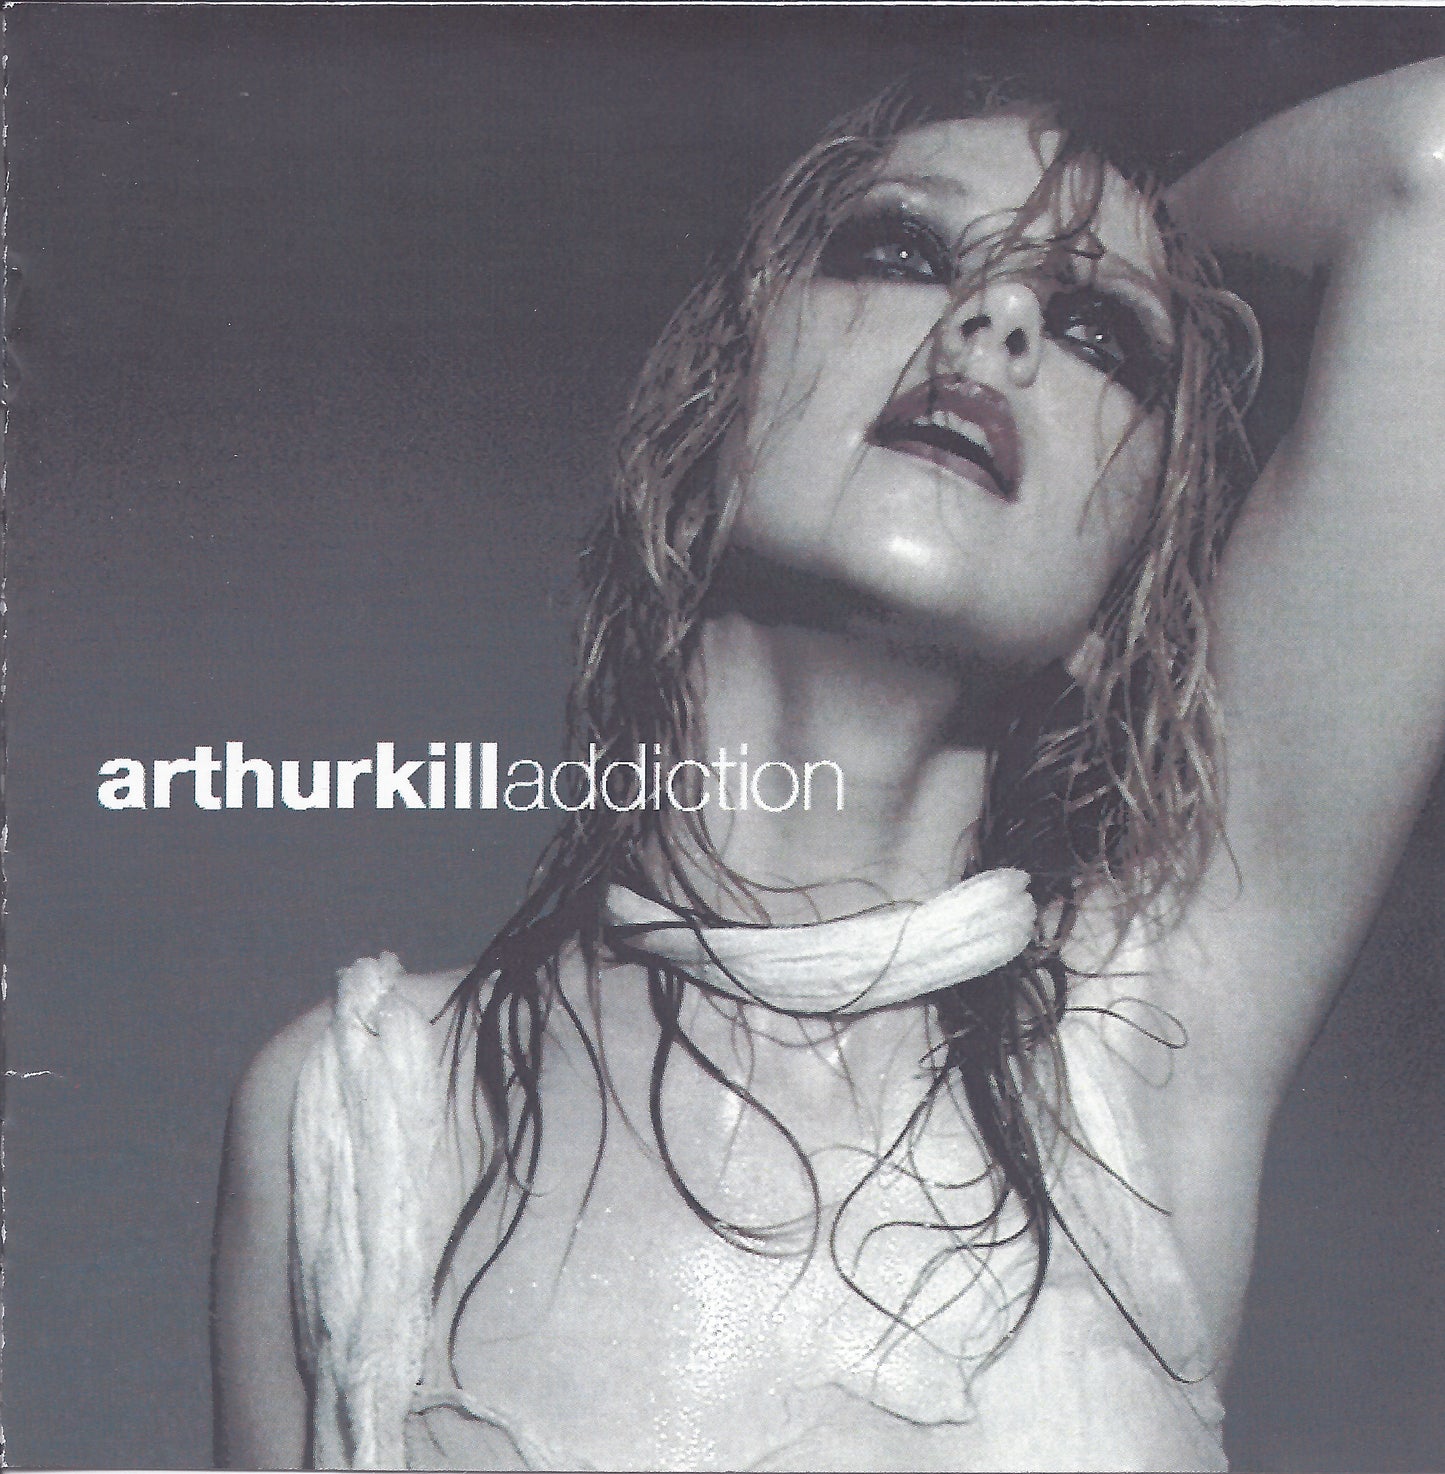 Arthurkill - Addiction CD (includes video for 'It's No Good' plus bonus track 'Can't Back Down')